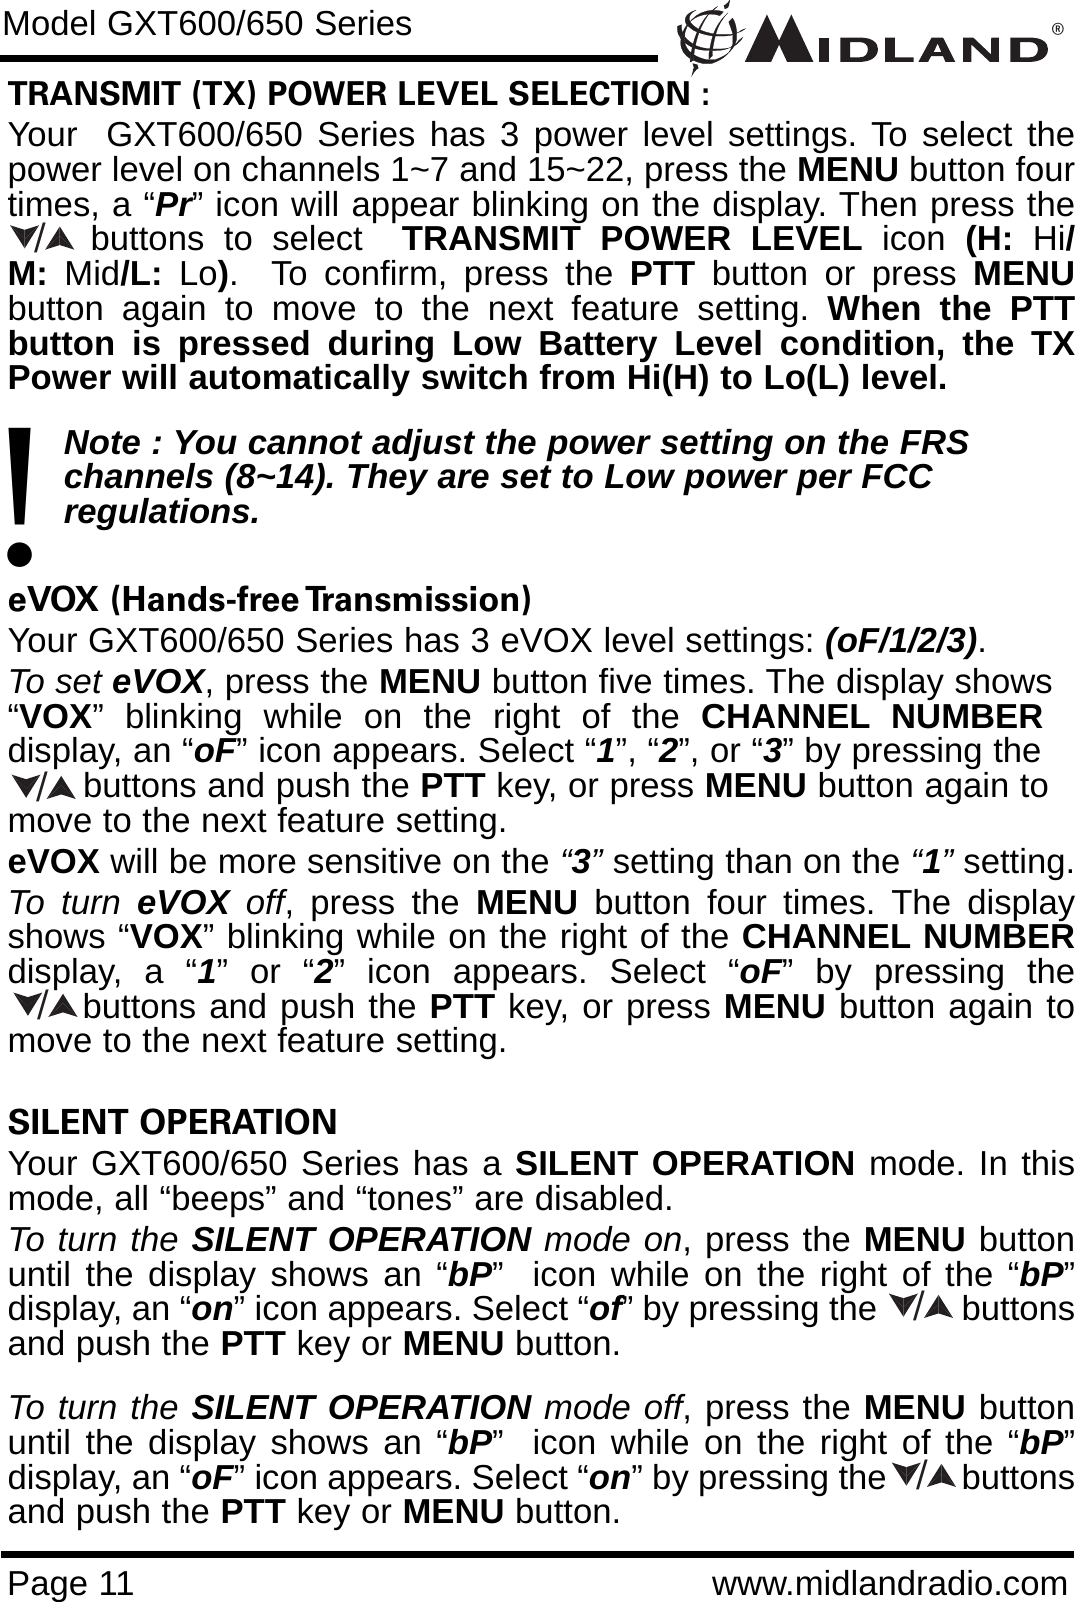 ®Page 11 www.midlandradio.comTRANSMIT (TX) POWER LEVEL SELECTION :Your  GXT600/650 Series has 3 power level settings. To select thepower level on channels 1~7 and 15~22, press the MENU button fourtimes, a “Pr” icon will appear blinking on the display. Then press thebuttons to select  TRANSMIT POWER LEVEL icon  (H:  Hi/M:  Mid/L:  Lo).  To confirm, press the PTT button or press MENUbutton again to move to the next feature setting. When the PTTbutton is pressed during Low Battery Level condition, the TXPower will automatically switch from Hi(H) to Lo(L) level.Note : You cannot adjust the power setting on the FRS   channels (8~14). They are set to Low power per FCC          regulations.eVOX (Hands-free Transmission) Your GXT600/650 Series has 3 eVOX level settings: (oF/1/2/3).To set eVOX, press the MENU button five times. The display shows“VOX”  blinking  while  on  the  right  of  the  CHANNEL NUMBERdisplay, an “oF” icon appears. Select “1”, “2”, or “3” by pressing thebuttons and push the PTT key, or press MENU button again tomove to the next feature setting.  eVOX will be more sensitive on the “3”setting than on the “1”setting.To turn eVOX off, press the MENU button four times. The displayshows “VOX” blinking while on the right of the CHANNEL NUMBERdisplay, a “1” or “2” icon appears. Select “oF” by pressing thebuttons and push the PTT key, or press MENU button again tomove to the next feature setting.SILENT OPERATION Your GXT600/650 Series has a SILENT OPERATION mode. In thismode, all “beeps” and “tones” are disabled. To turn the SILENT OPERATION mode on, press the MENU buttonuntil the display shows an “bP”  icon while on the right of the “bP”display, an “on” icon appears. Select “of” by pressing the         buttonsand push the PTT key or MENU button. To turn the SILENT OPERATION mode off, press the MENU buttonuntil the display shows an “bP”  icon while on the right of the “bP”display, an “oF” icon appears. Select “on” by pressing the        buttonsand push the PTT key or MENU button.Model GXT600/650 Series!/////